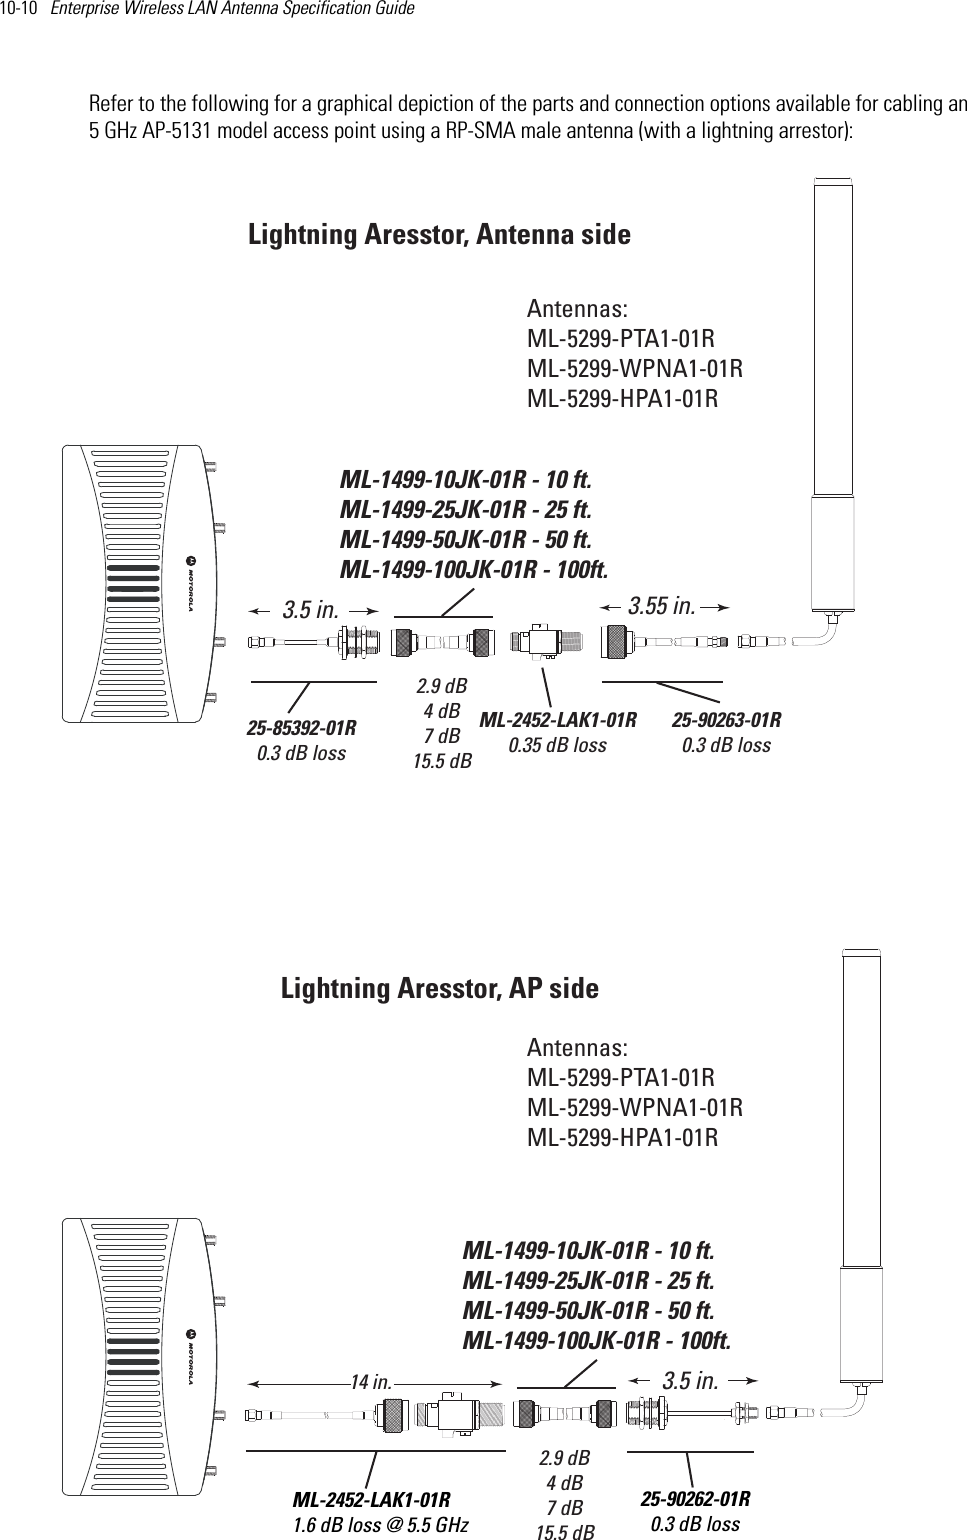 10-10   Enterprise Wireless LAN Antenna Specification Guide Refer to the following for a graphical depiction of the parts and connection options available for cabling an 5 GHz AP-5131 model access point using a RP-SMA male antenna (with a lightning arrestor):  Antennas:ML-5299-PTA1-01RML-5299-WPNA1-01RML-5299-HPA1-01RAntennas:ML-5299-PTA1-01RML-5299-WPNA1-01RML-5299-HPA1-01RML-2452-LAK1-01R0.35 dB lossLightning Aresstor, AP sideLightning Aresstor, Antenna sideML-1499-10JK-01R - 10 ft.ML-1499-25JK-01R - 25 ft.ML-1499-50JK-01R - 50 ft.ML-1499-100JK-01R - 100ft. 2.9 dB4 dB7 dB15.5 dBML-1499-10JK-01R - 10 ft.ML-1499-25JK-01R - 25 ft.ML-1499-50JK-01R - 50 ft.ML-1499-100JK-01R - 100ft. 2.9 dB4 dB7 dB15.5 dBML-2452-LAK1-01R1.6 dB loss @ 5.5 GHz14 in.  25-90262-01R0.3 dB loss3.5 in.25-90263-01R0.3 dB loss3.55 in.25-85392-01R0.3 dB loss3.5 in.